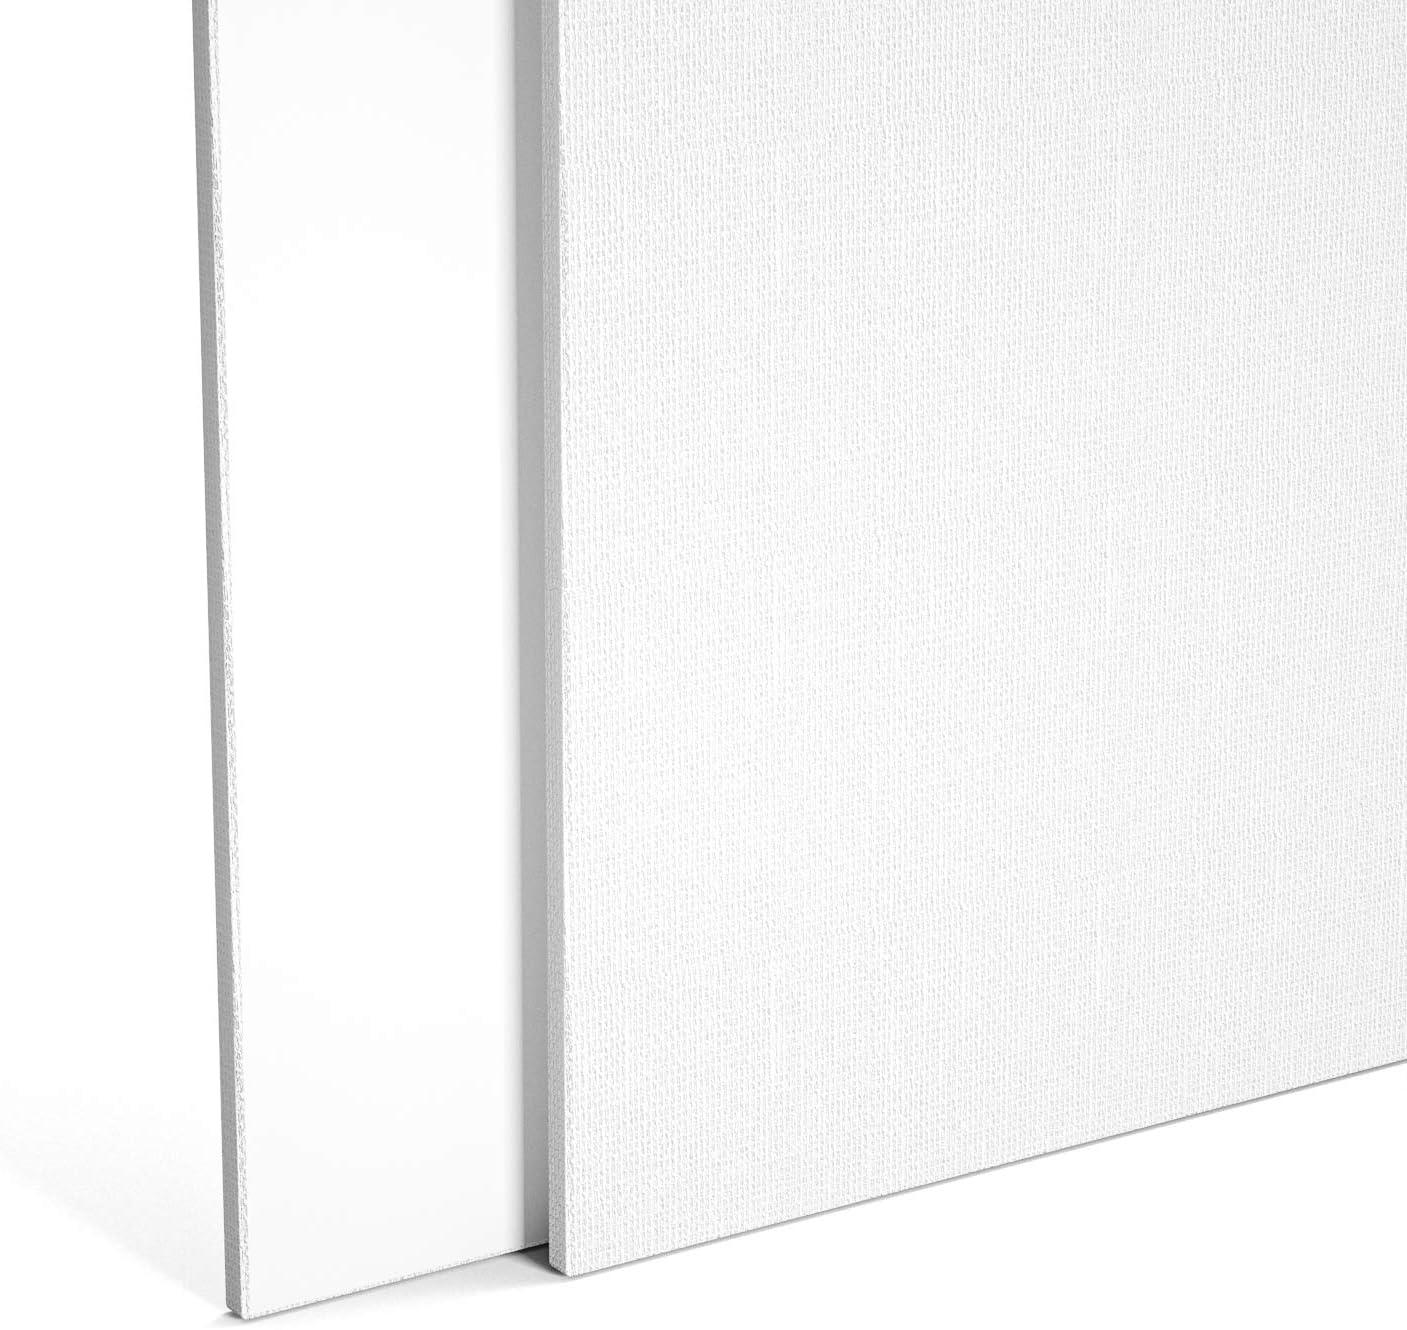 GOTIDEAL Canvas Boards 8x10 inch Set of 10 Gesso Primed White Blank Canvases  for Painting - 100% Cotton Art Supplies Canvas Panel for Acrylic Paint  Pouring Oil Paint Watercolor Gouache 8x10